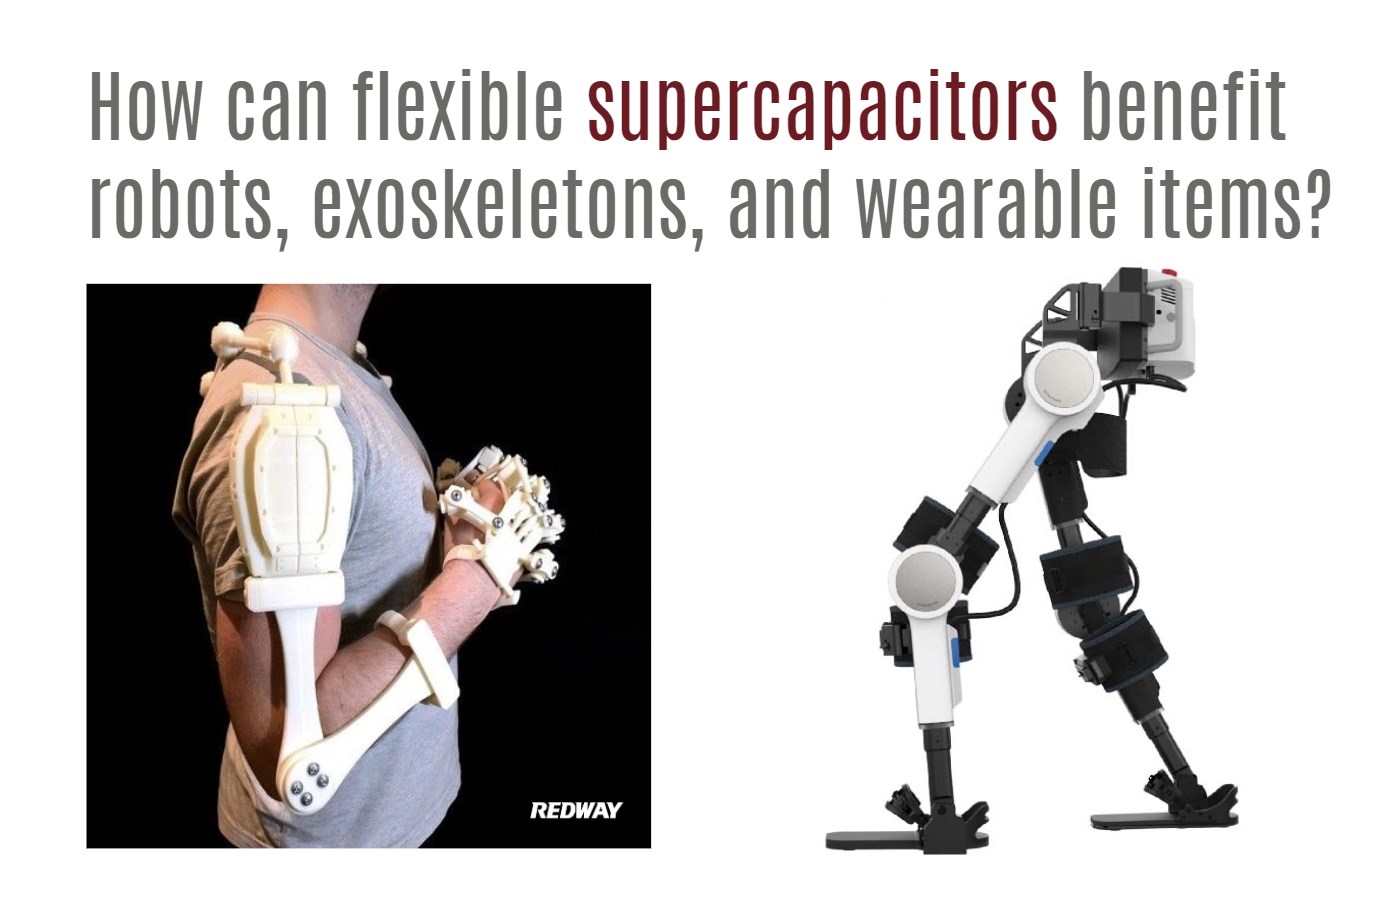 How can flexible supercapacitors benefit robots, exoskeletons, and wearable items?